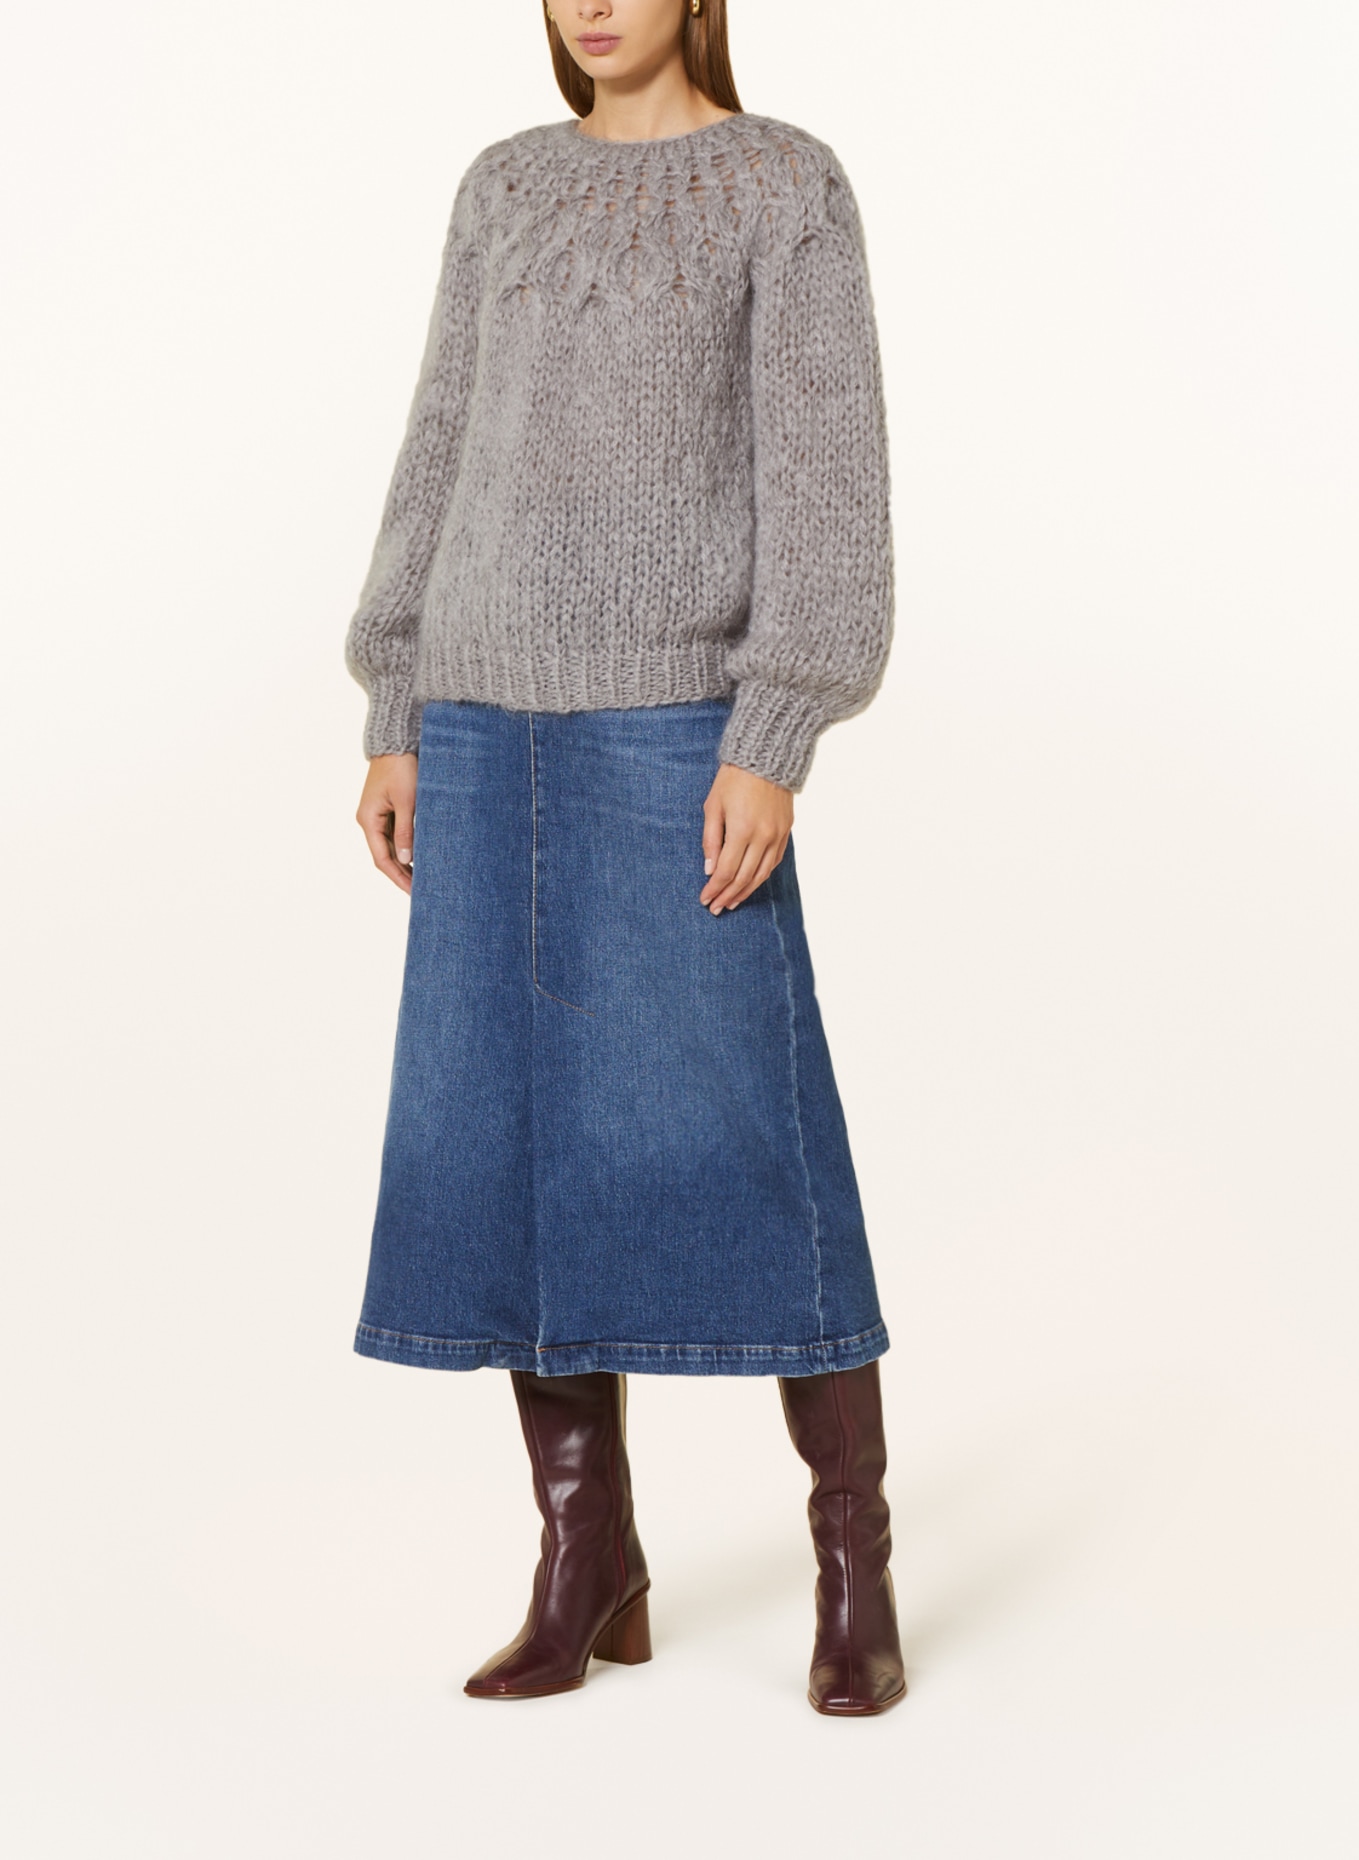 MAIAMI Mohair sweater, Color: GRAY (Image 2)